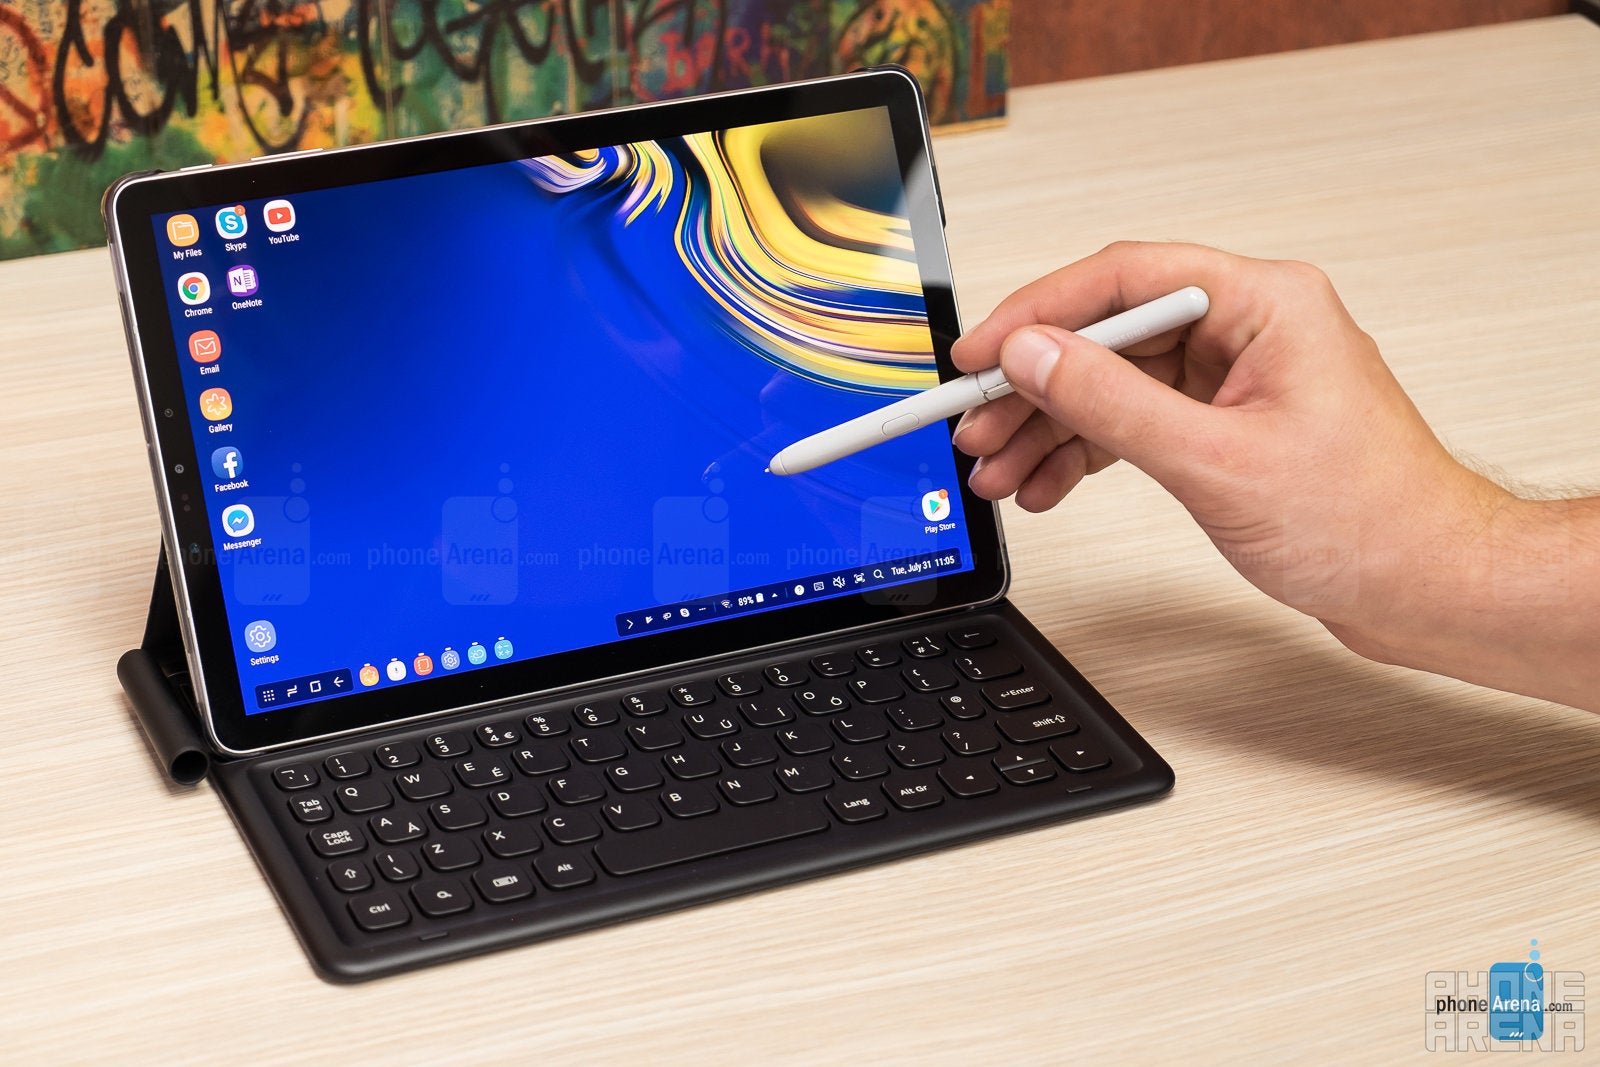 Samsung Galaxy Tab S4 hands-on: thin bezels, quad speakers, and a super-wide screen